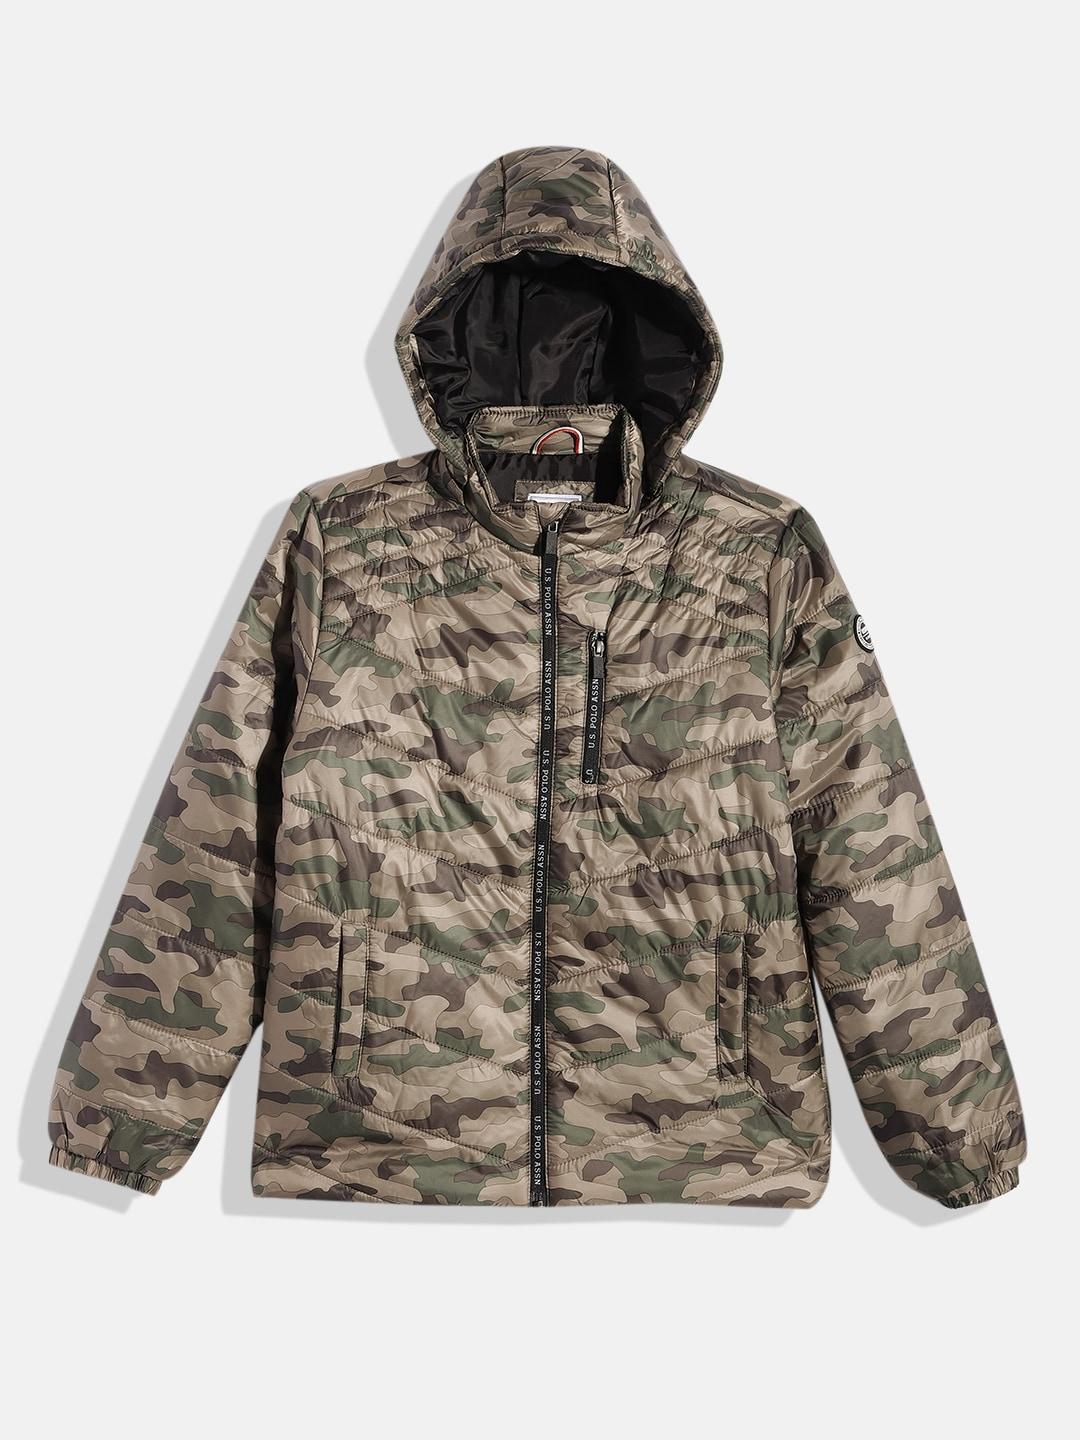 u.s. polo assn. kids boys olive green camouflage puffer jacket